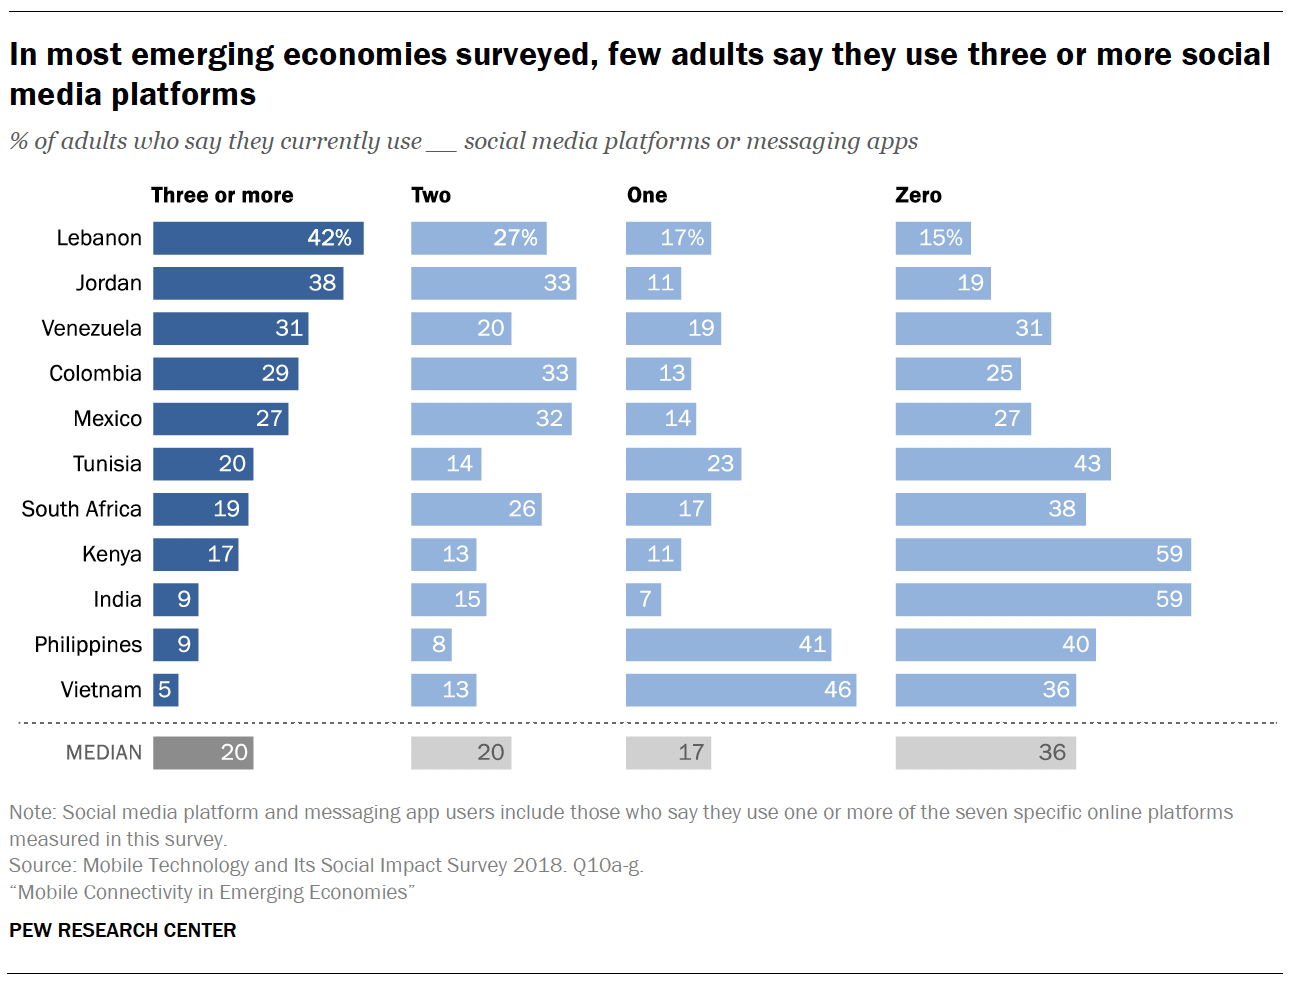 In most emerging economies surveyed, few adults say they use three or more social media platforms